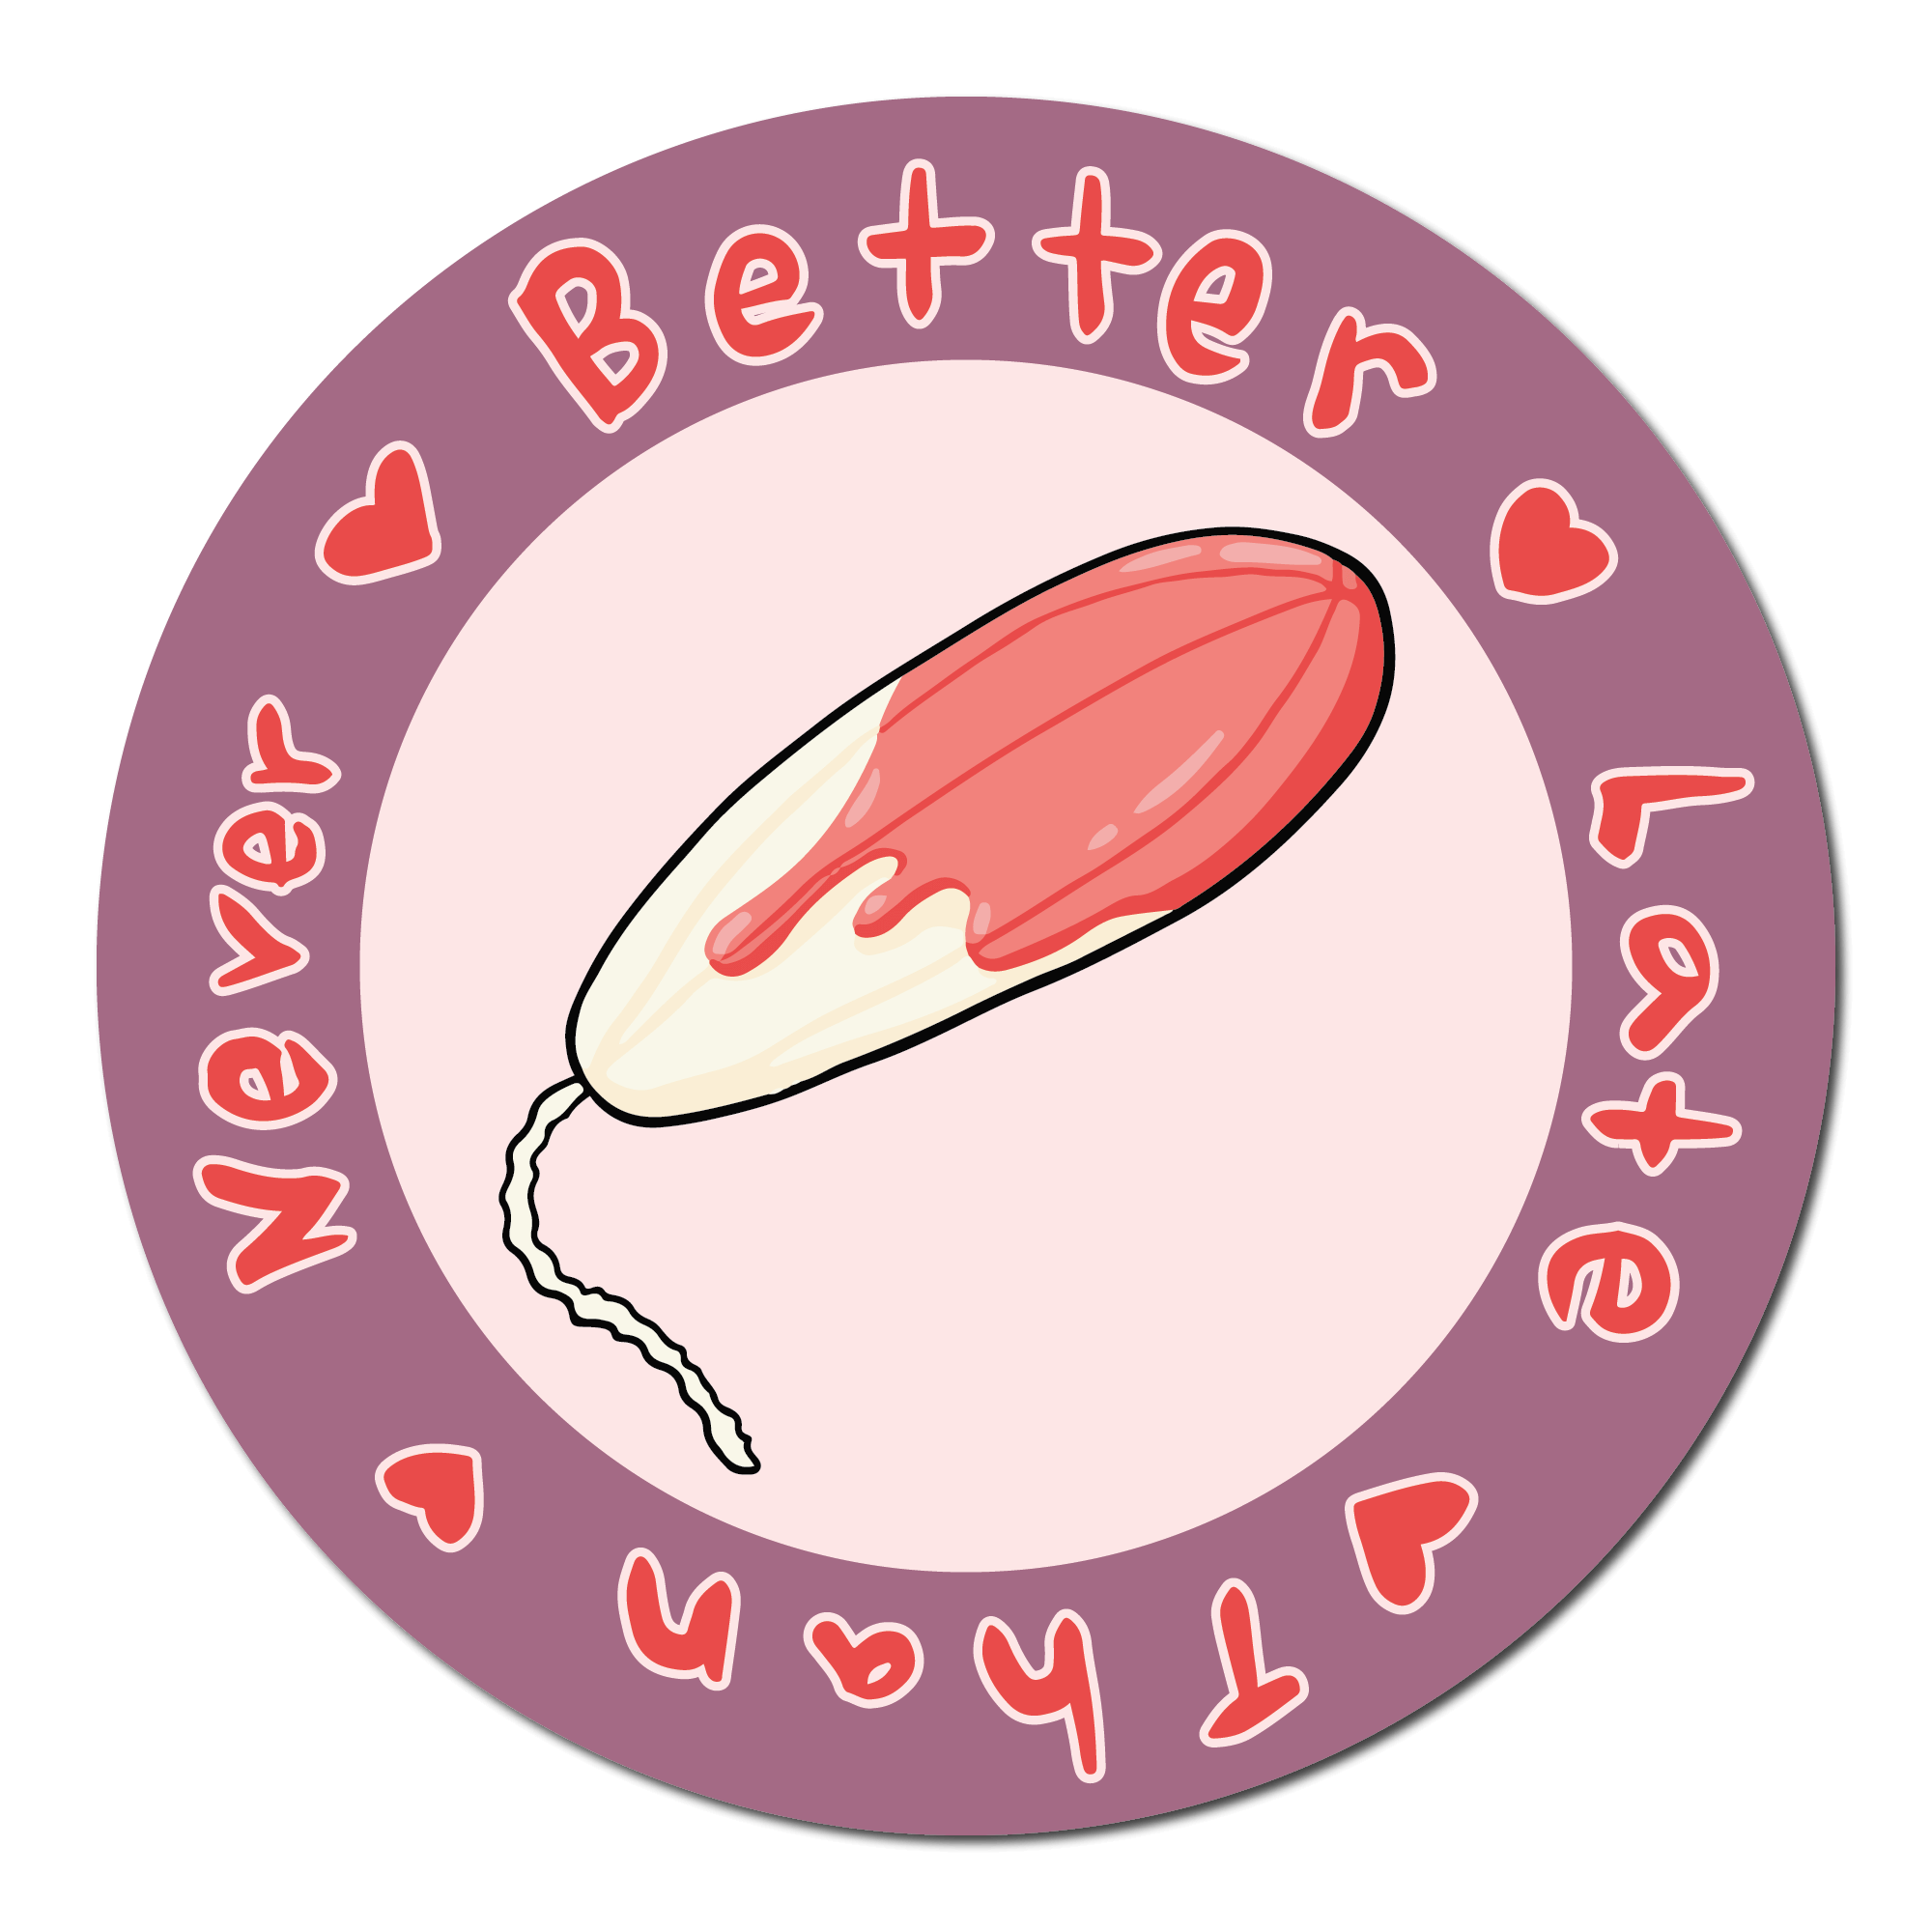 Small Circle Sticker with a bloody tampon in the middle and text saying Better Late Than Never around the outside with hearts separating each word